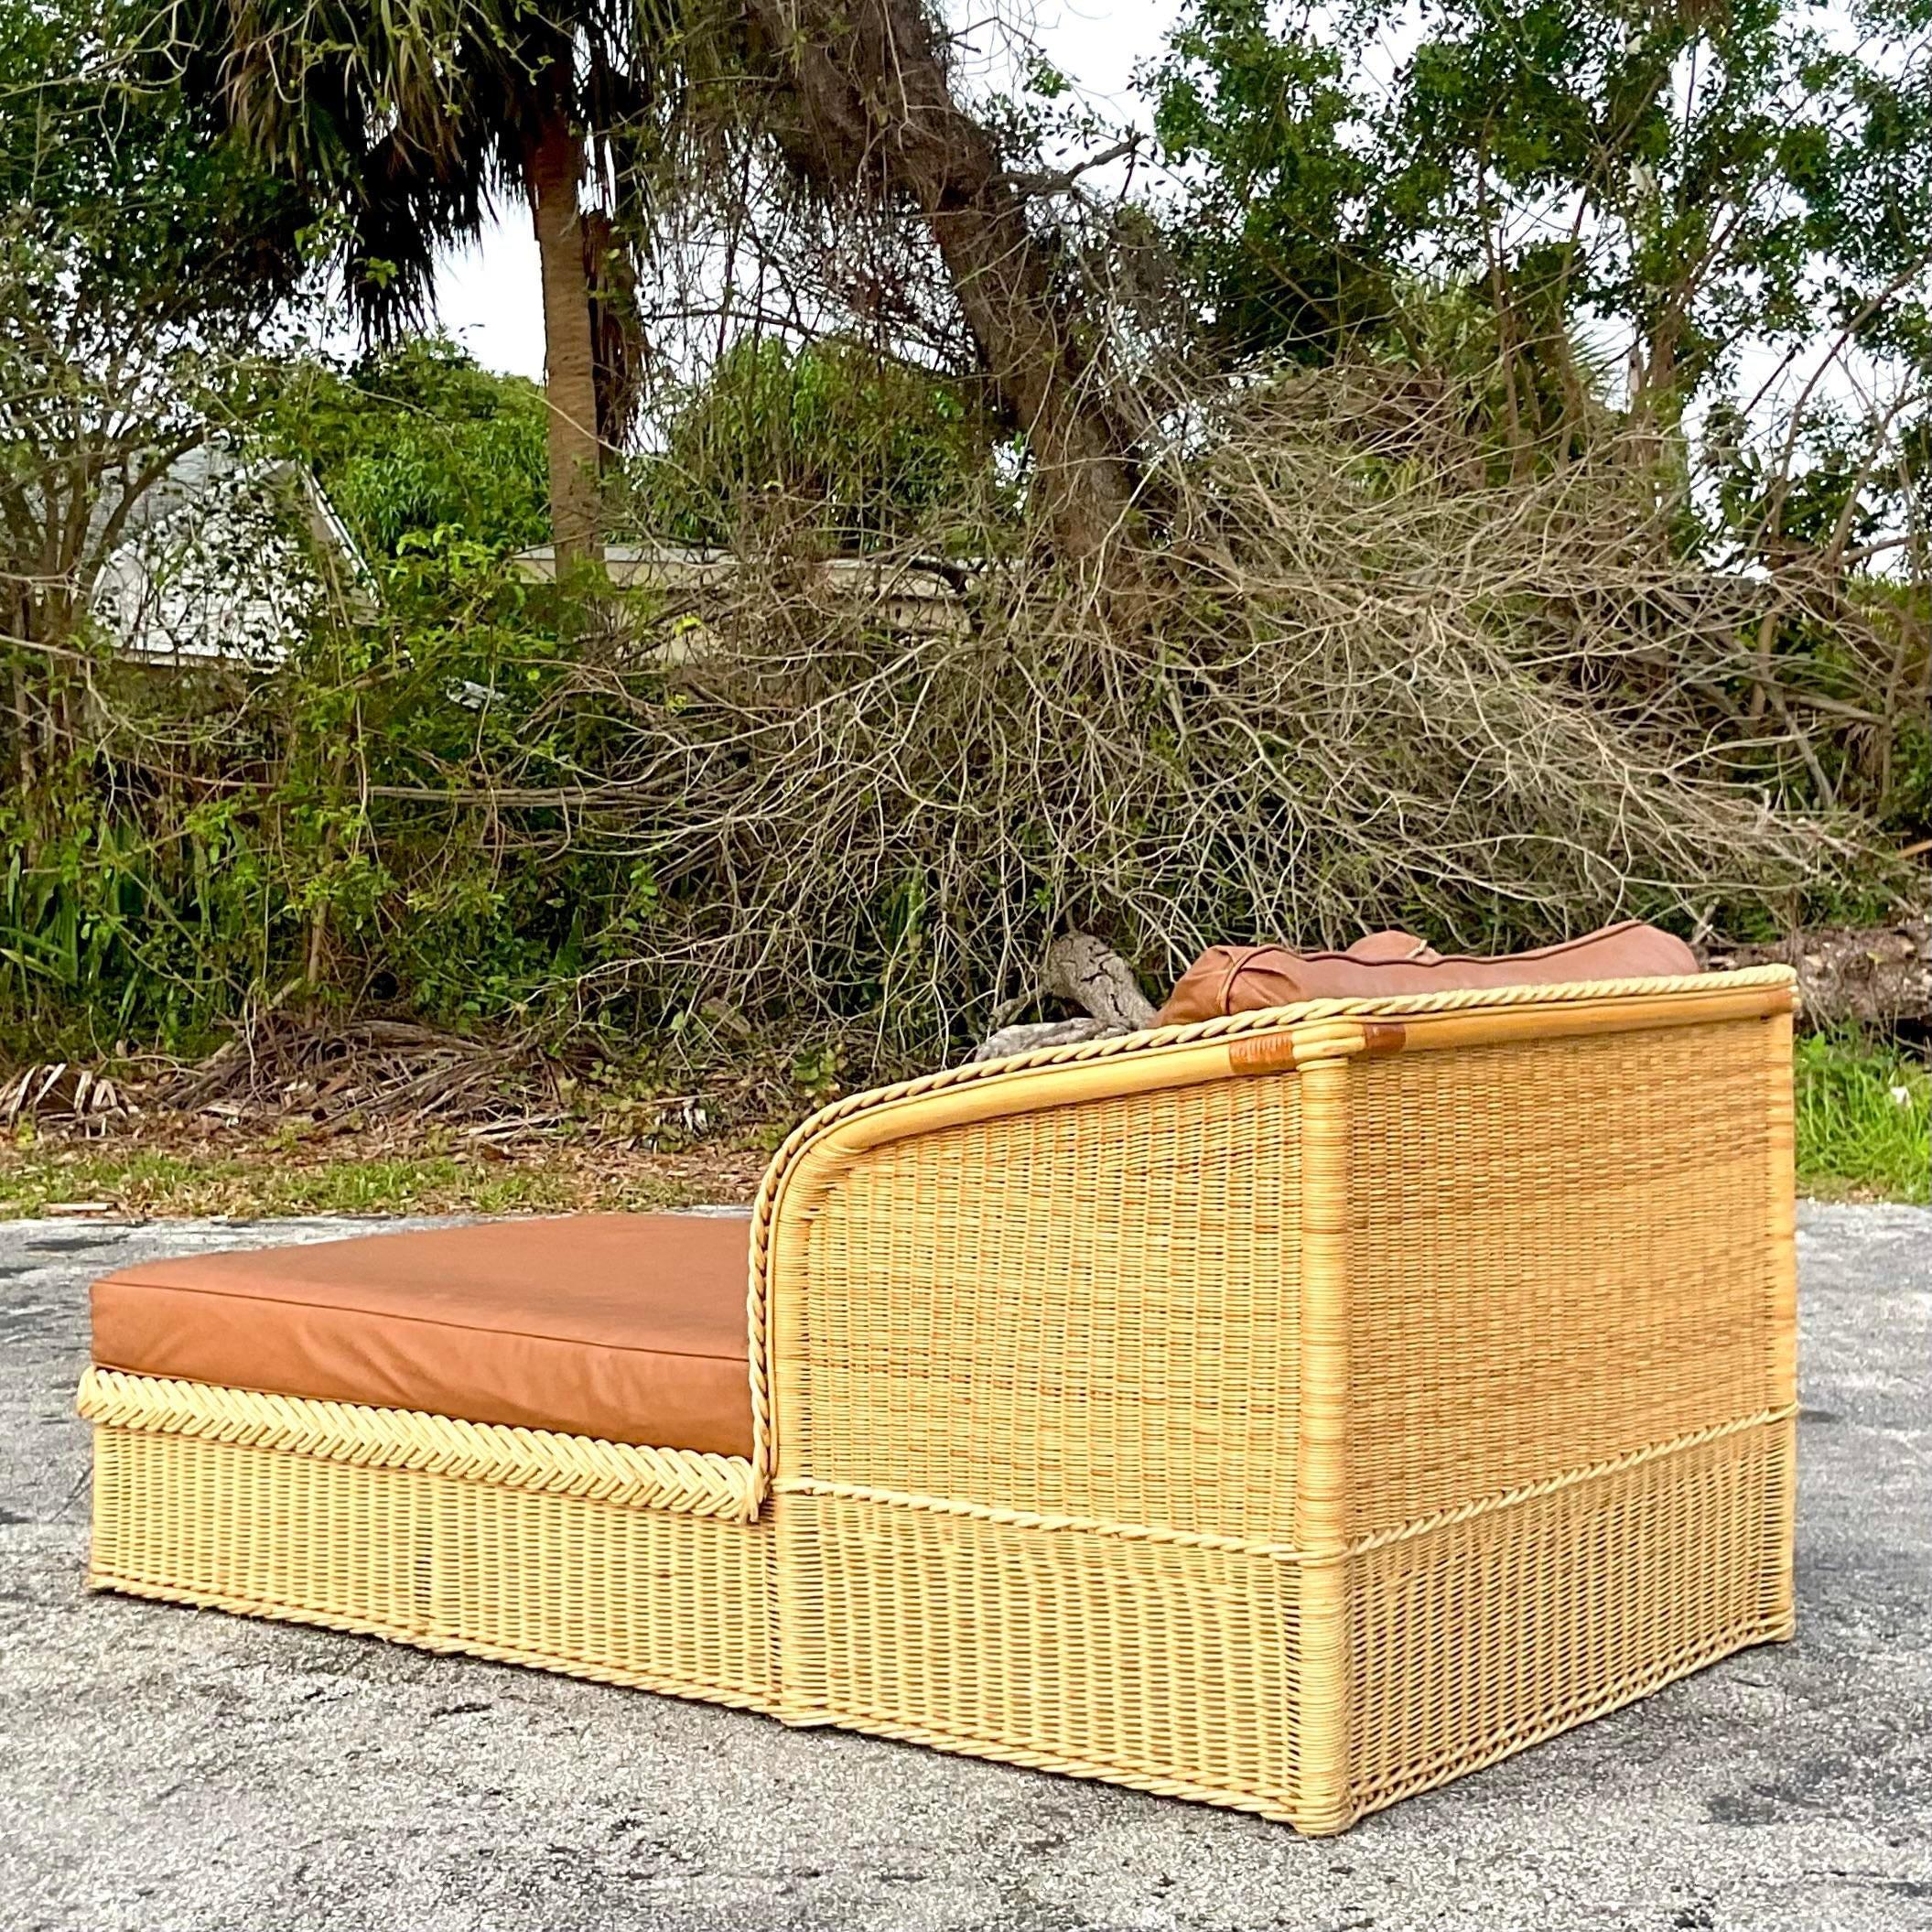 Vintage Coastal Bielecky Brothers Braided Rattan and Leather Chaise Lounge In Good Condition For Sale In west palm beach, FL